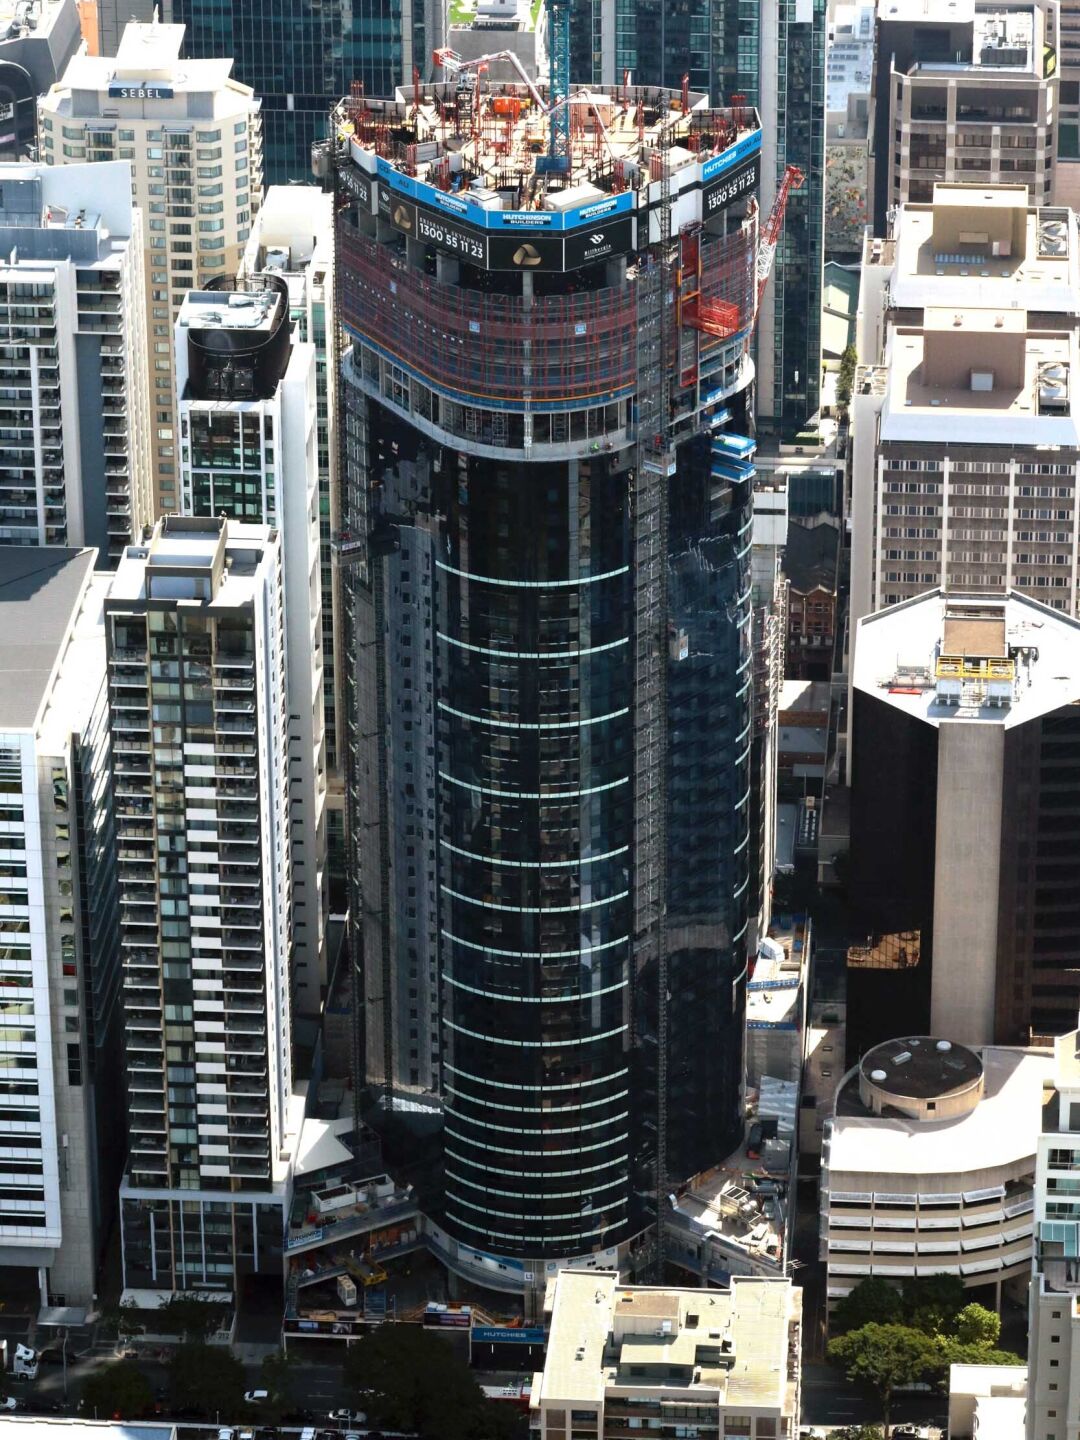 August 2017